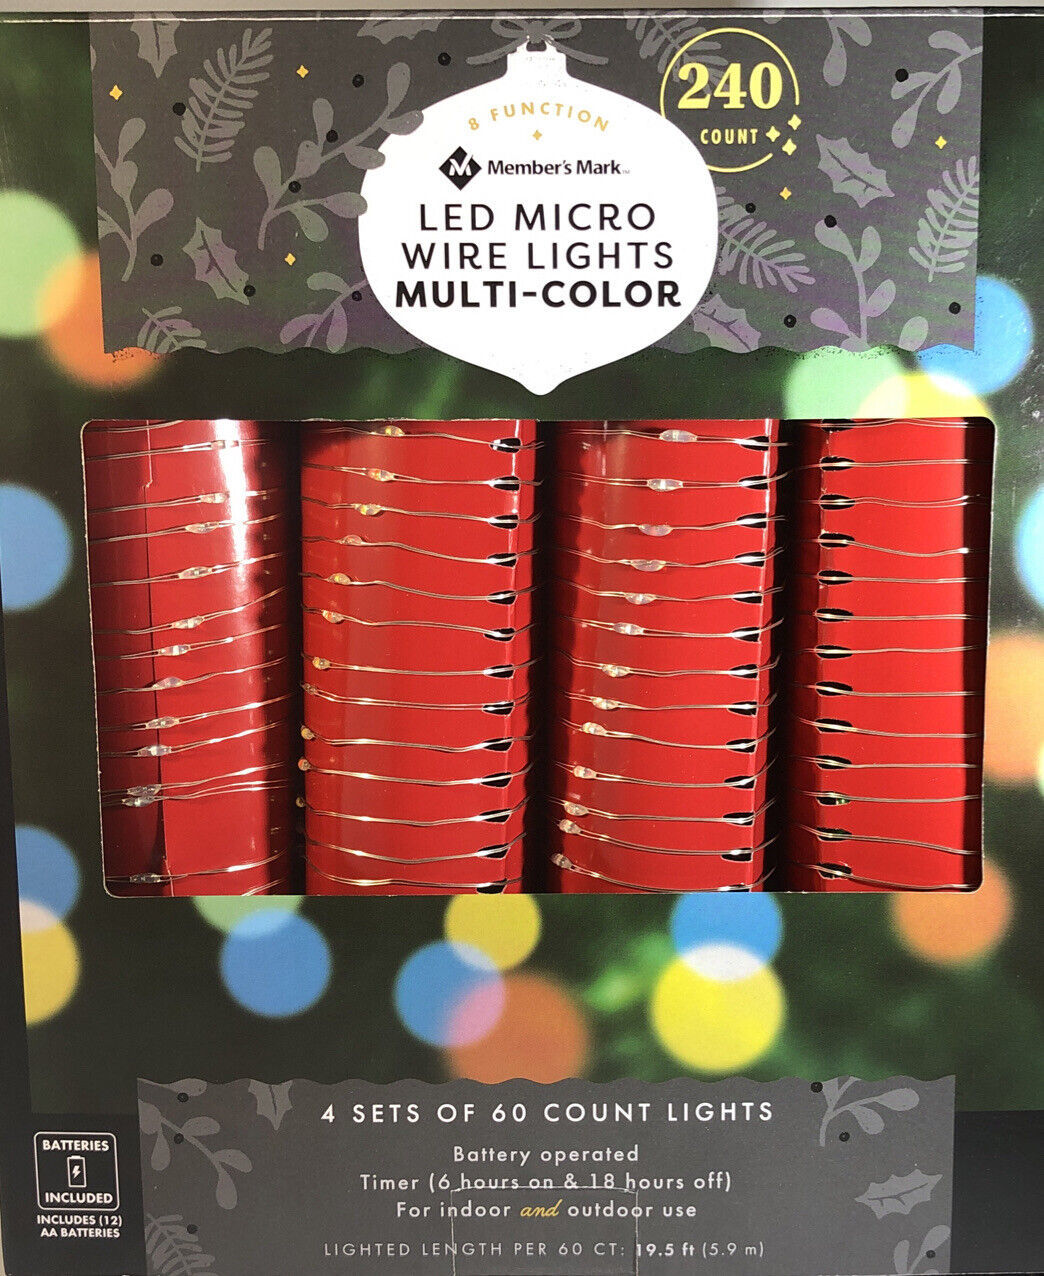 Members Mark Micro LED Wired Lights 240 Count 8 Function! Batteries Included!NEW